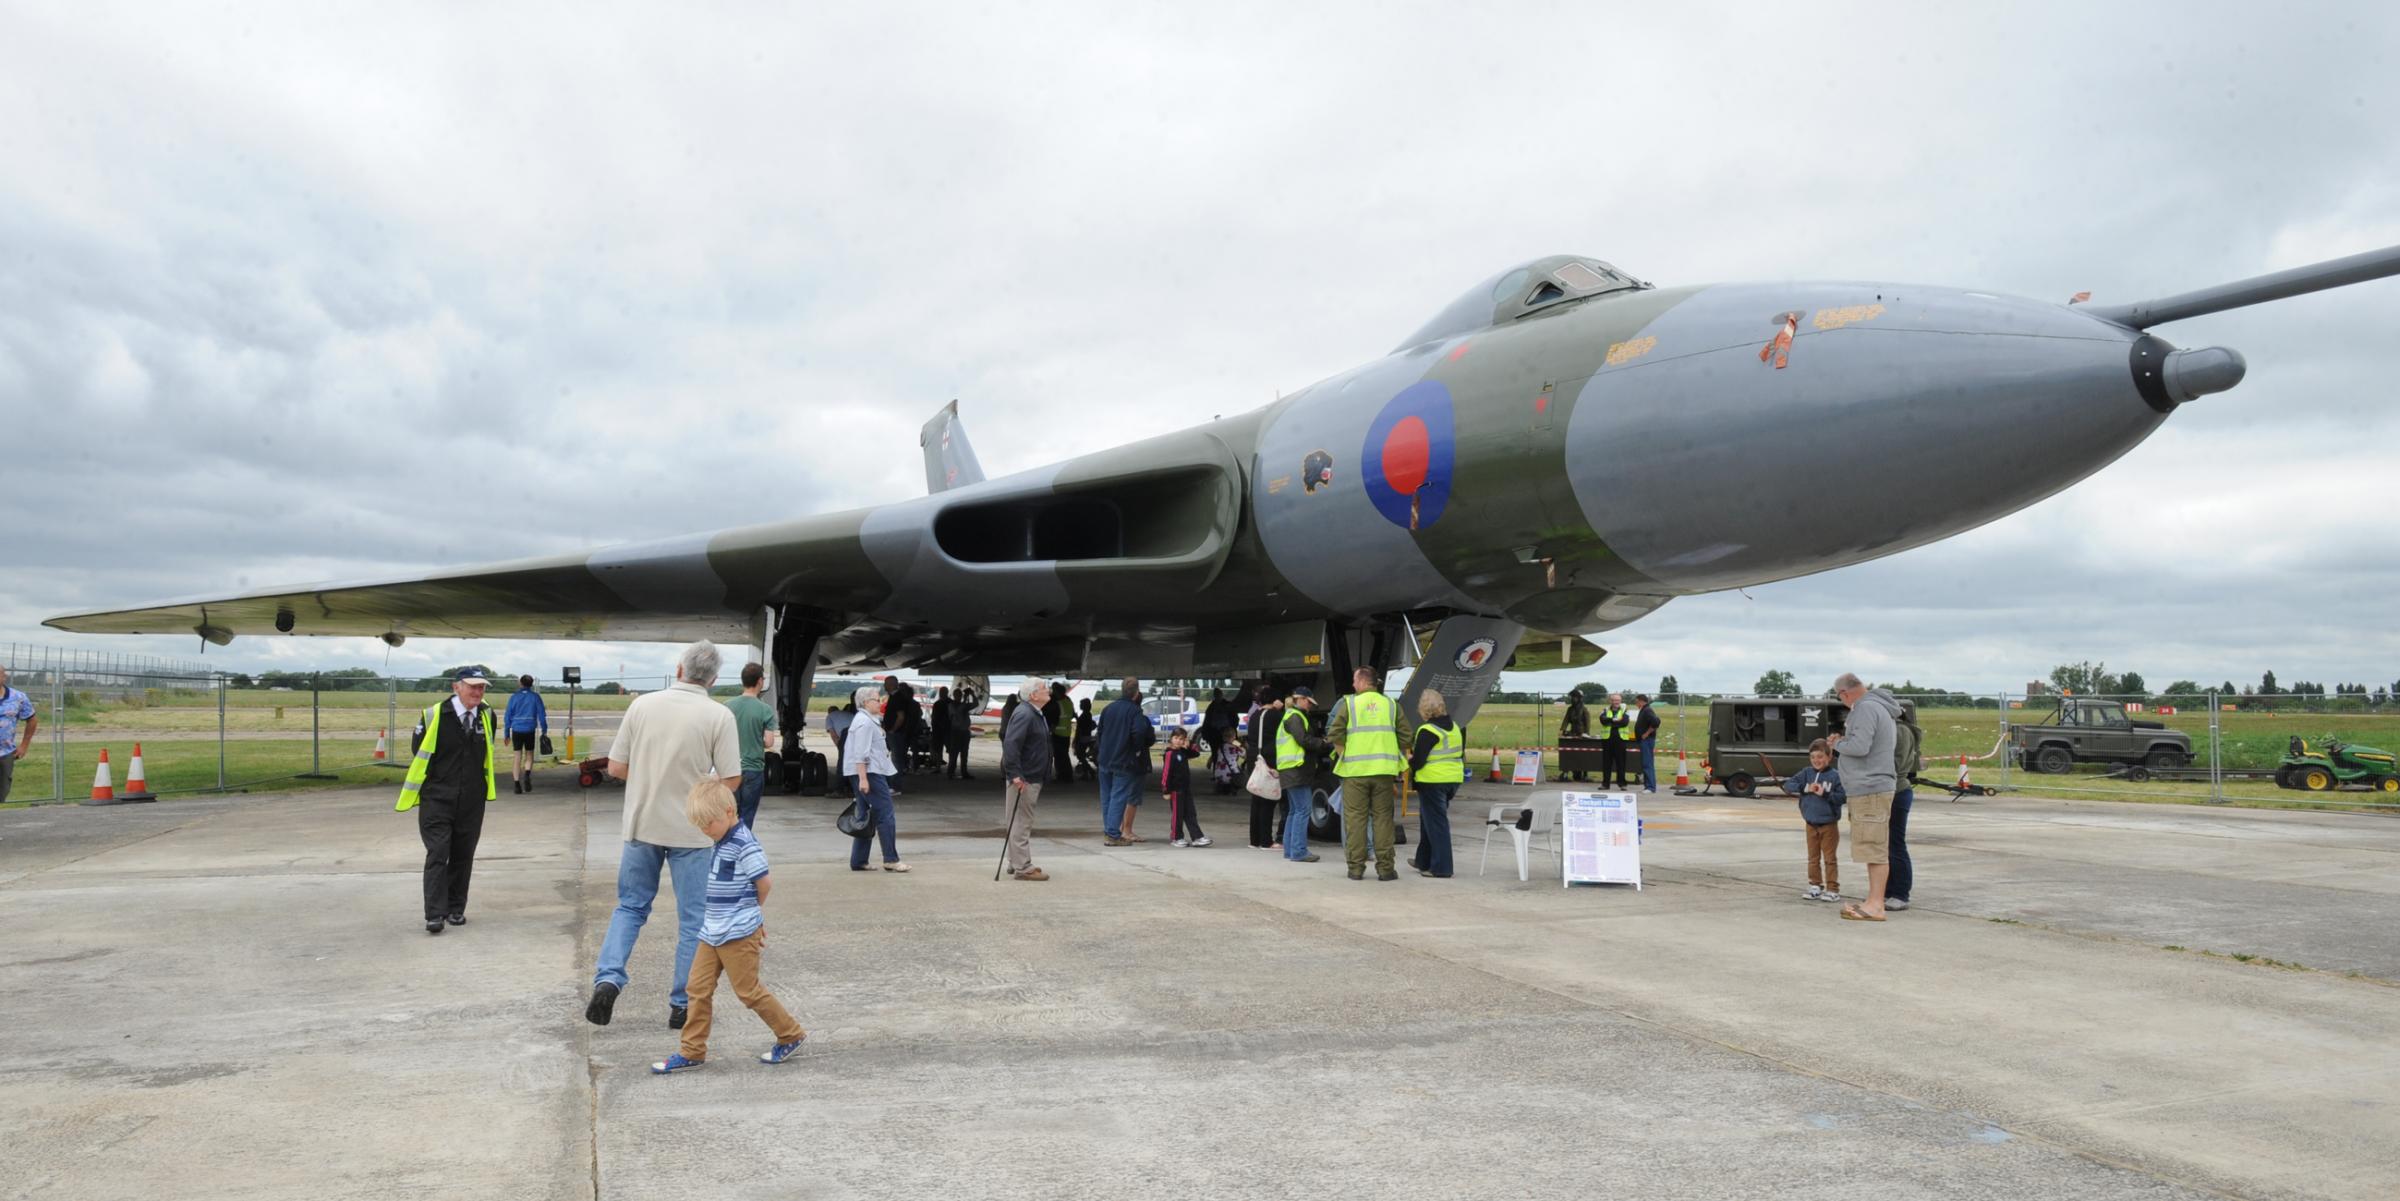 On the tarmac - the Vulcan open day proved incredibly popular as crowds of people flocked to Southend Airport in 2014